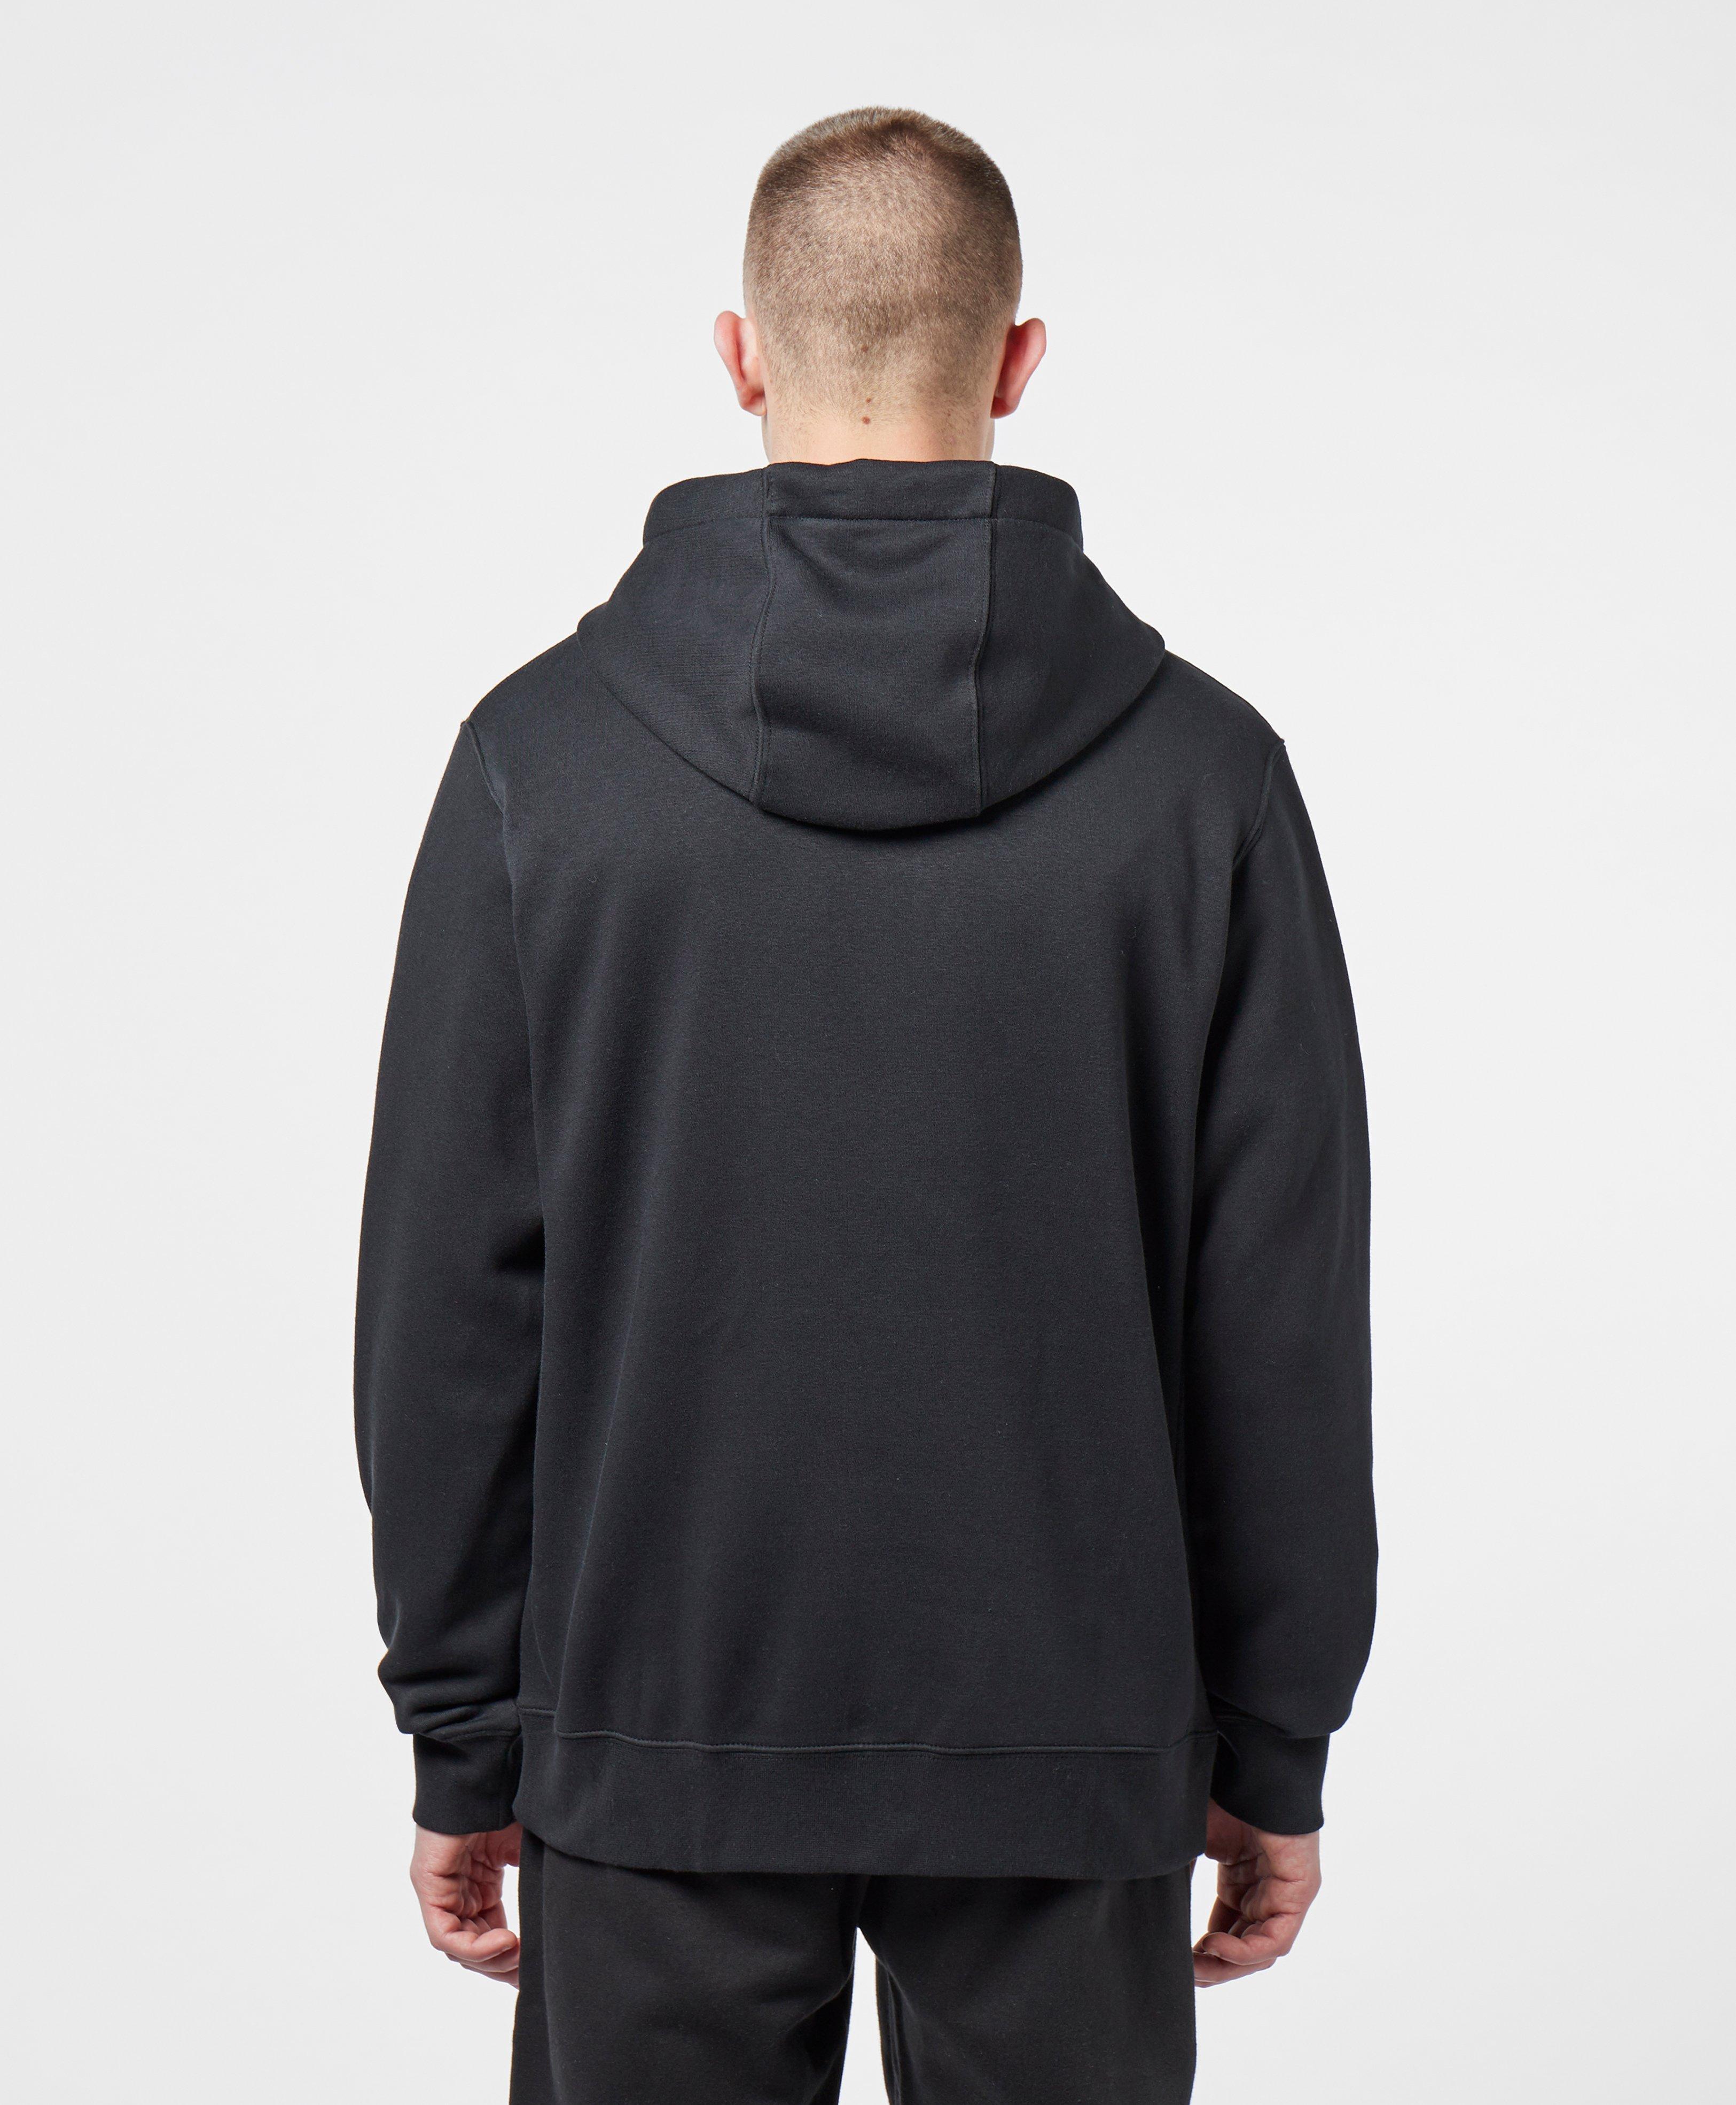 Nike Cotton Foundation Full Zip Hoodie in Black for Men - Save 10% - Lyst